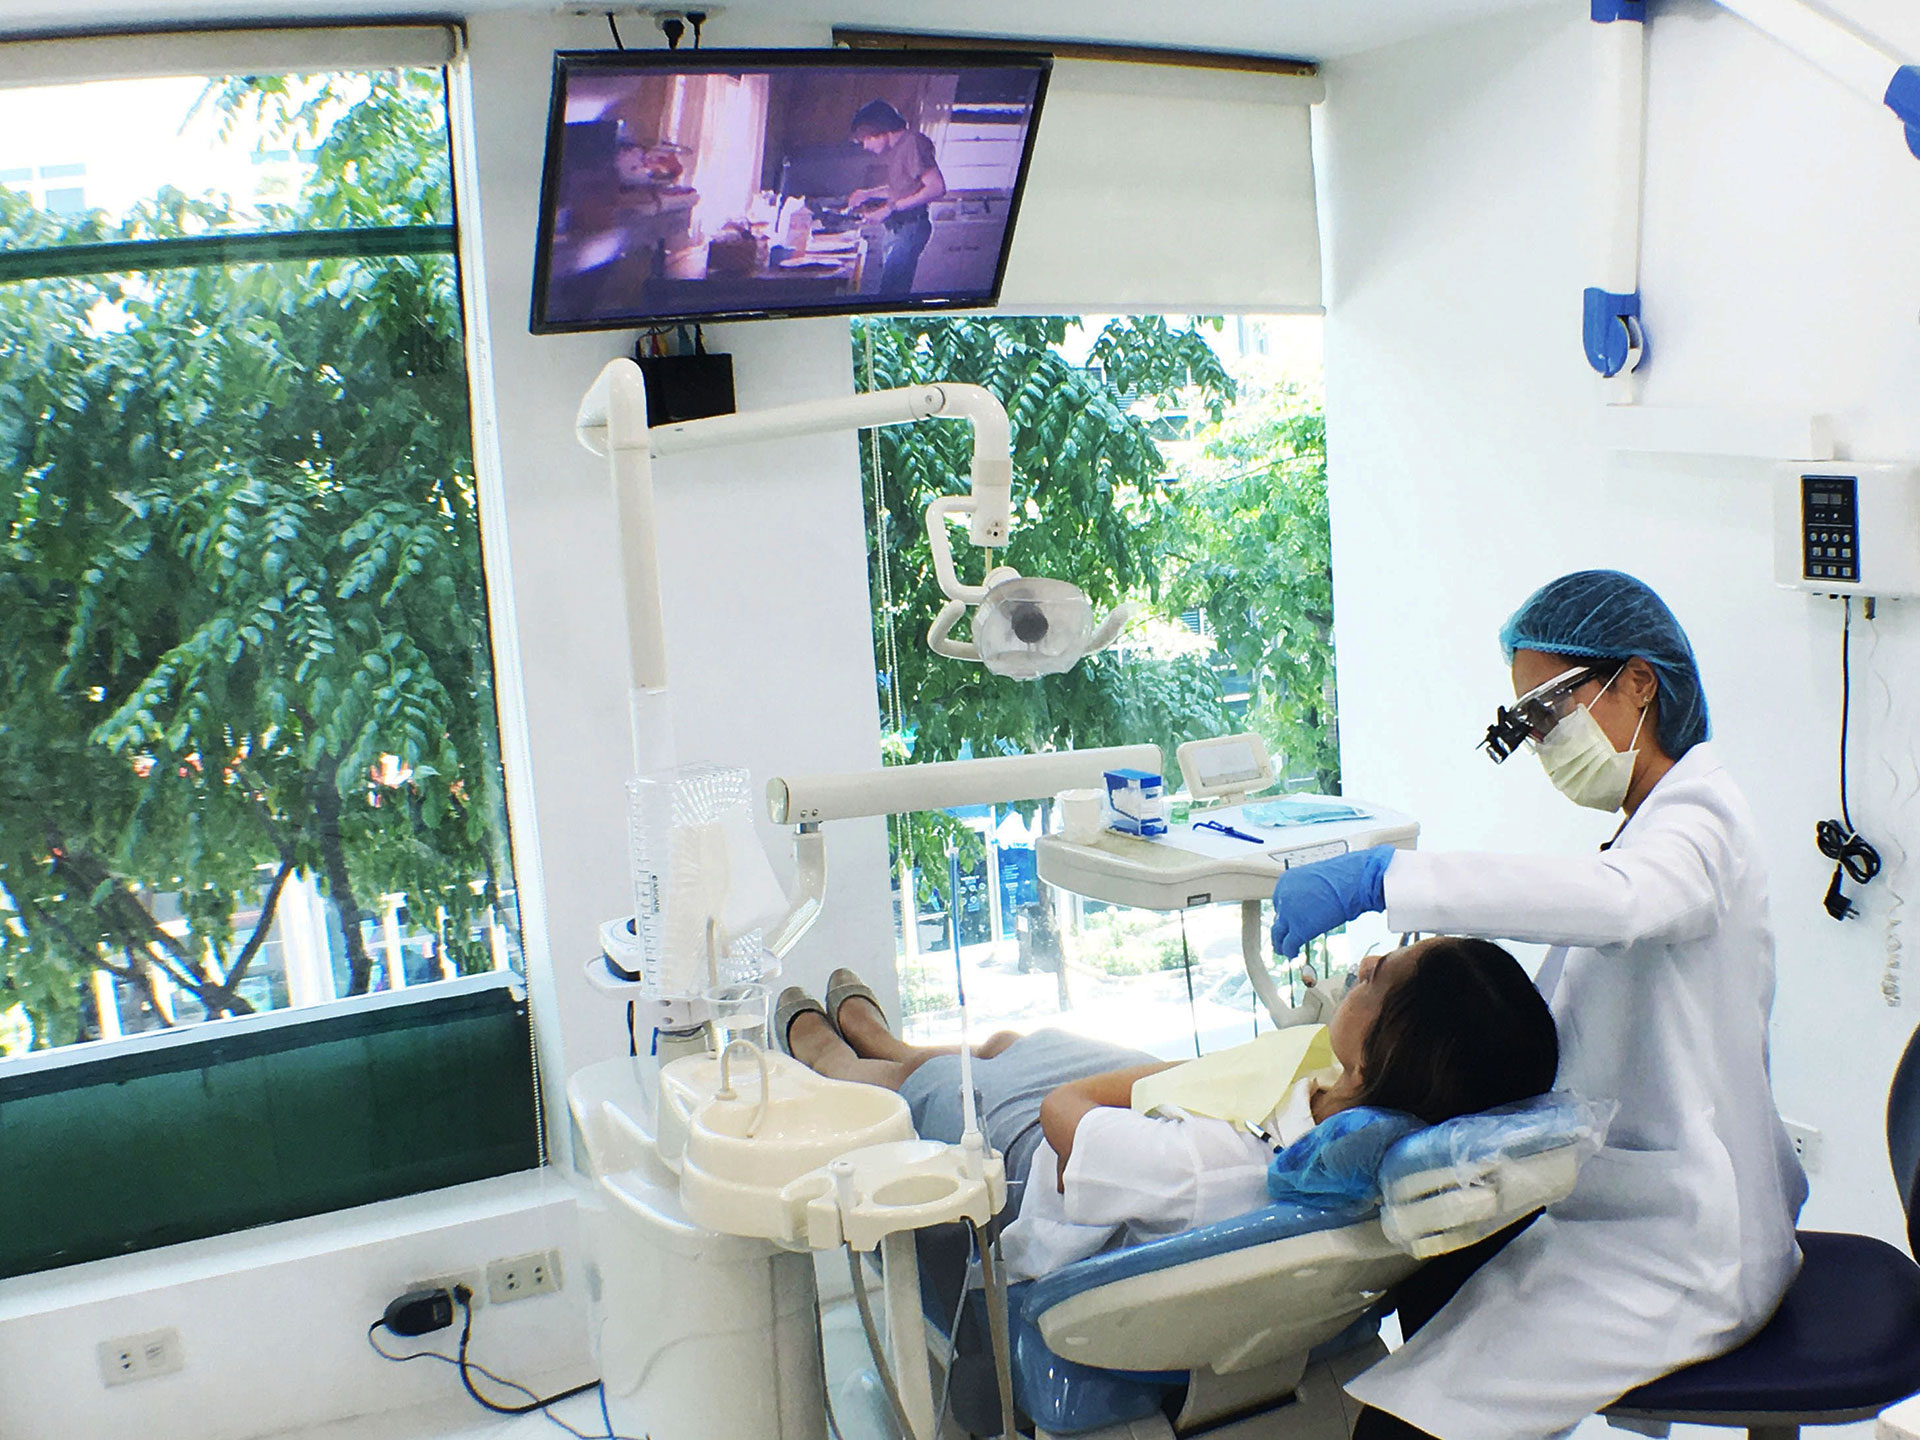 Selecting a reputed denture clinic for dental services/treatment